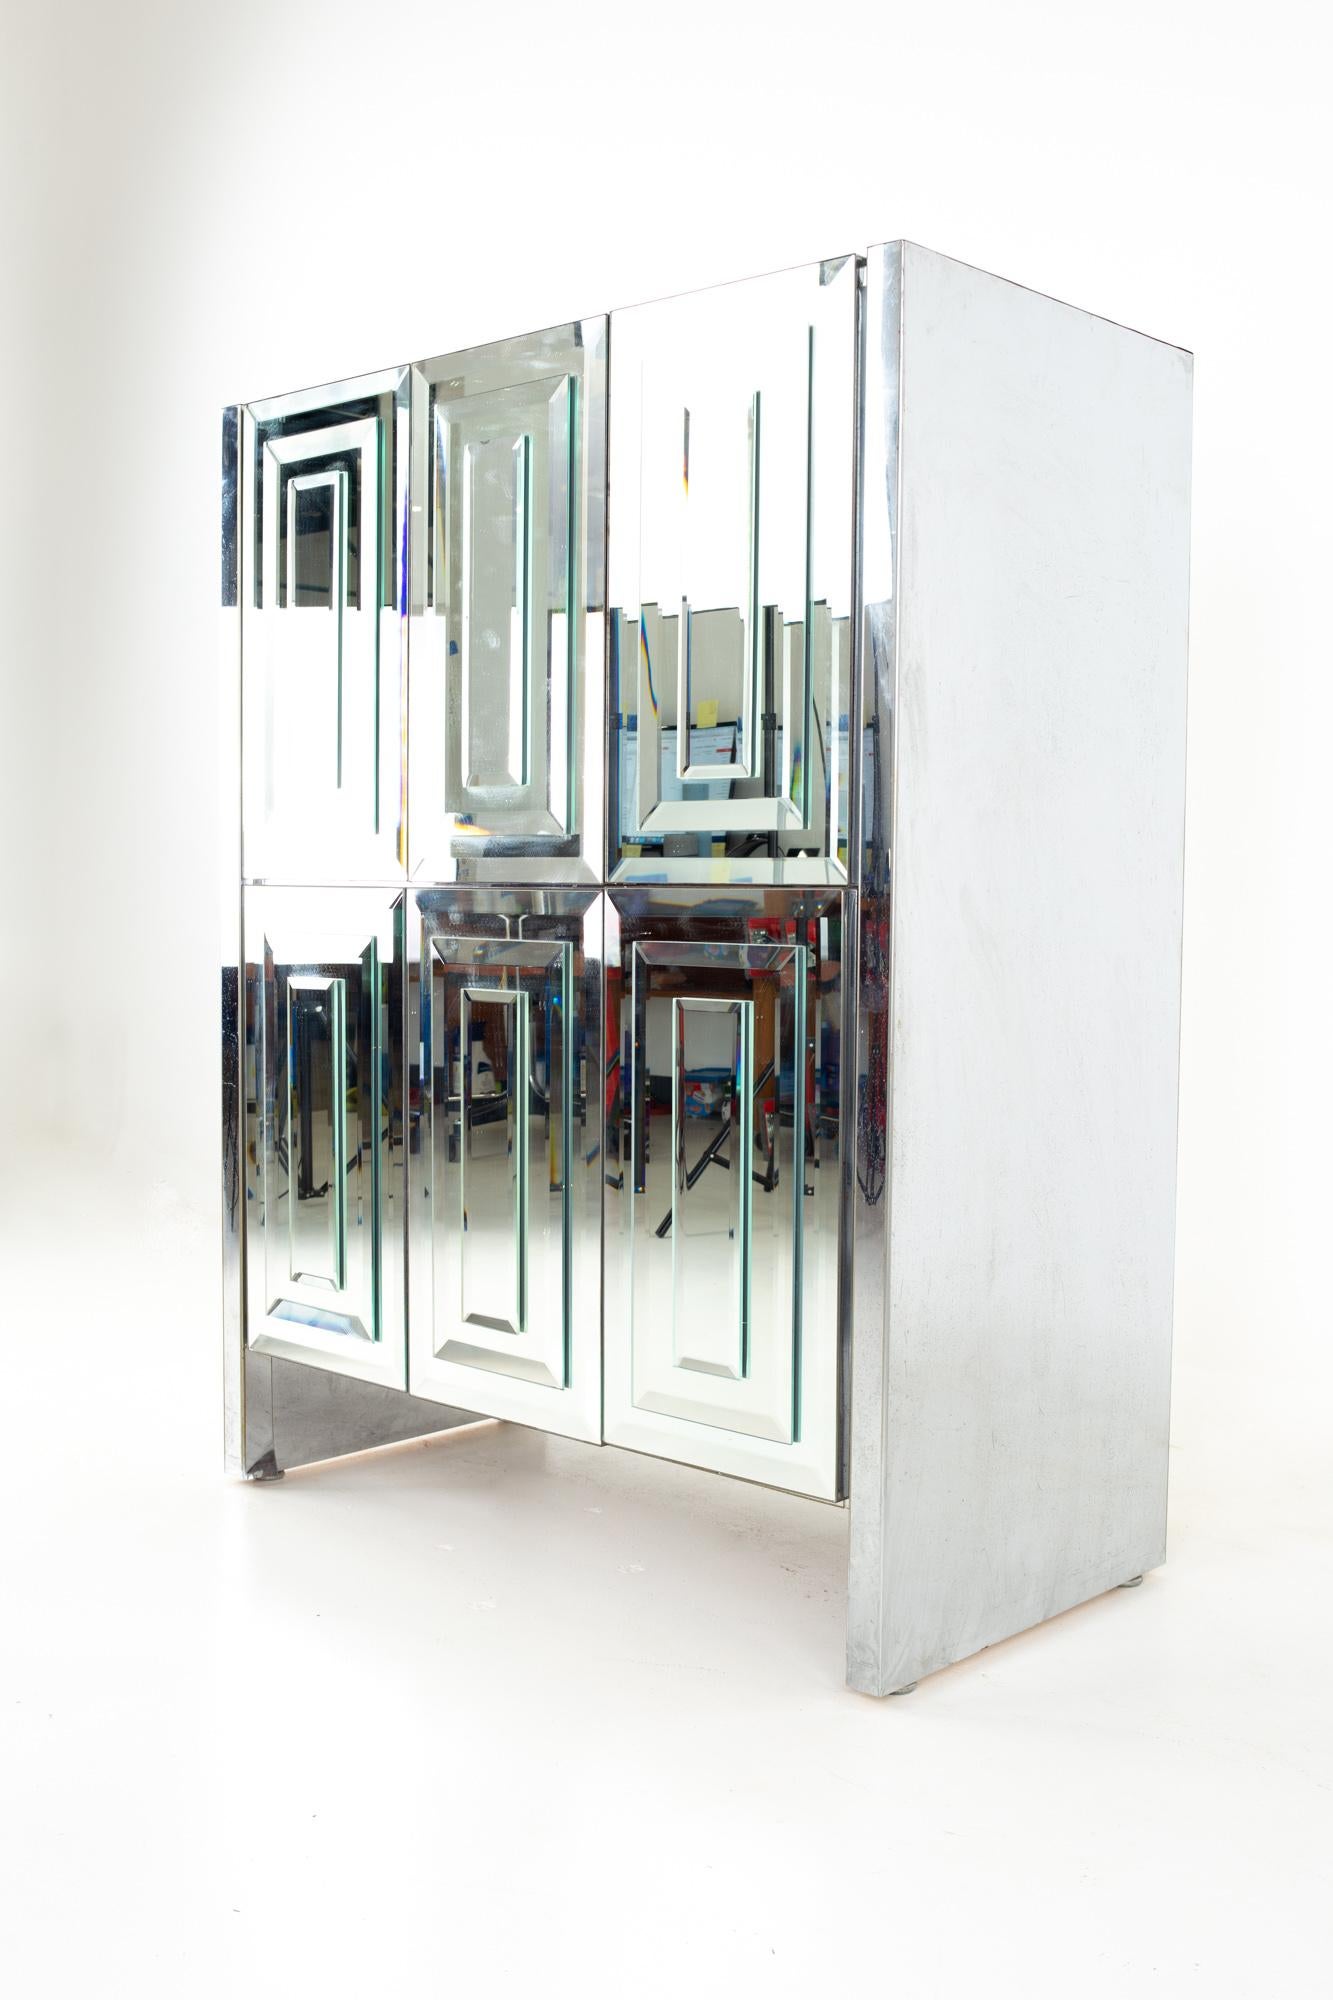 Ello Mid Century skyscraper mirrored highboy gentleman's chest
Gentleman's chest measures: 39.75 wide x 20.25 deep x 51.25 inches high 

All pieces of furniture can be had in what we call restored vintage condition. That means the piece is restored